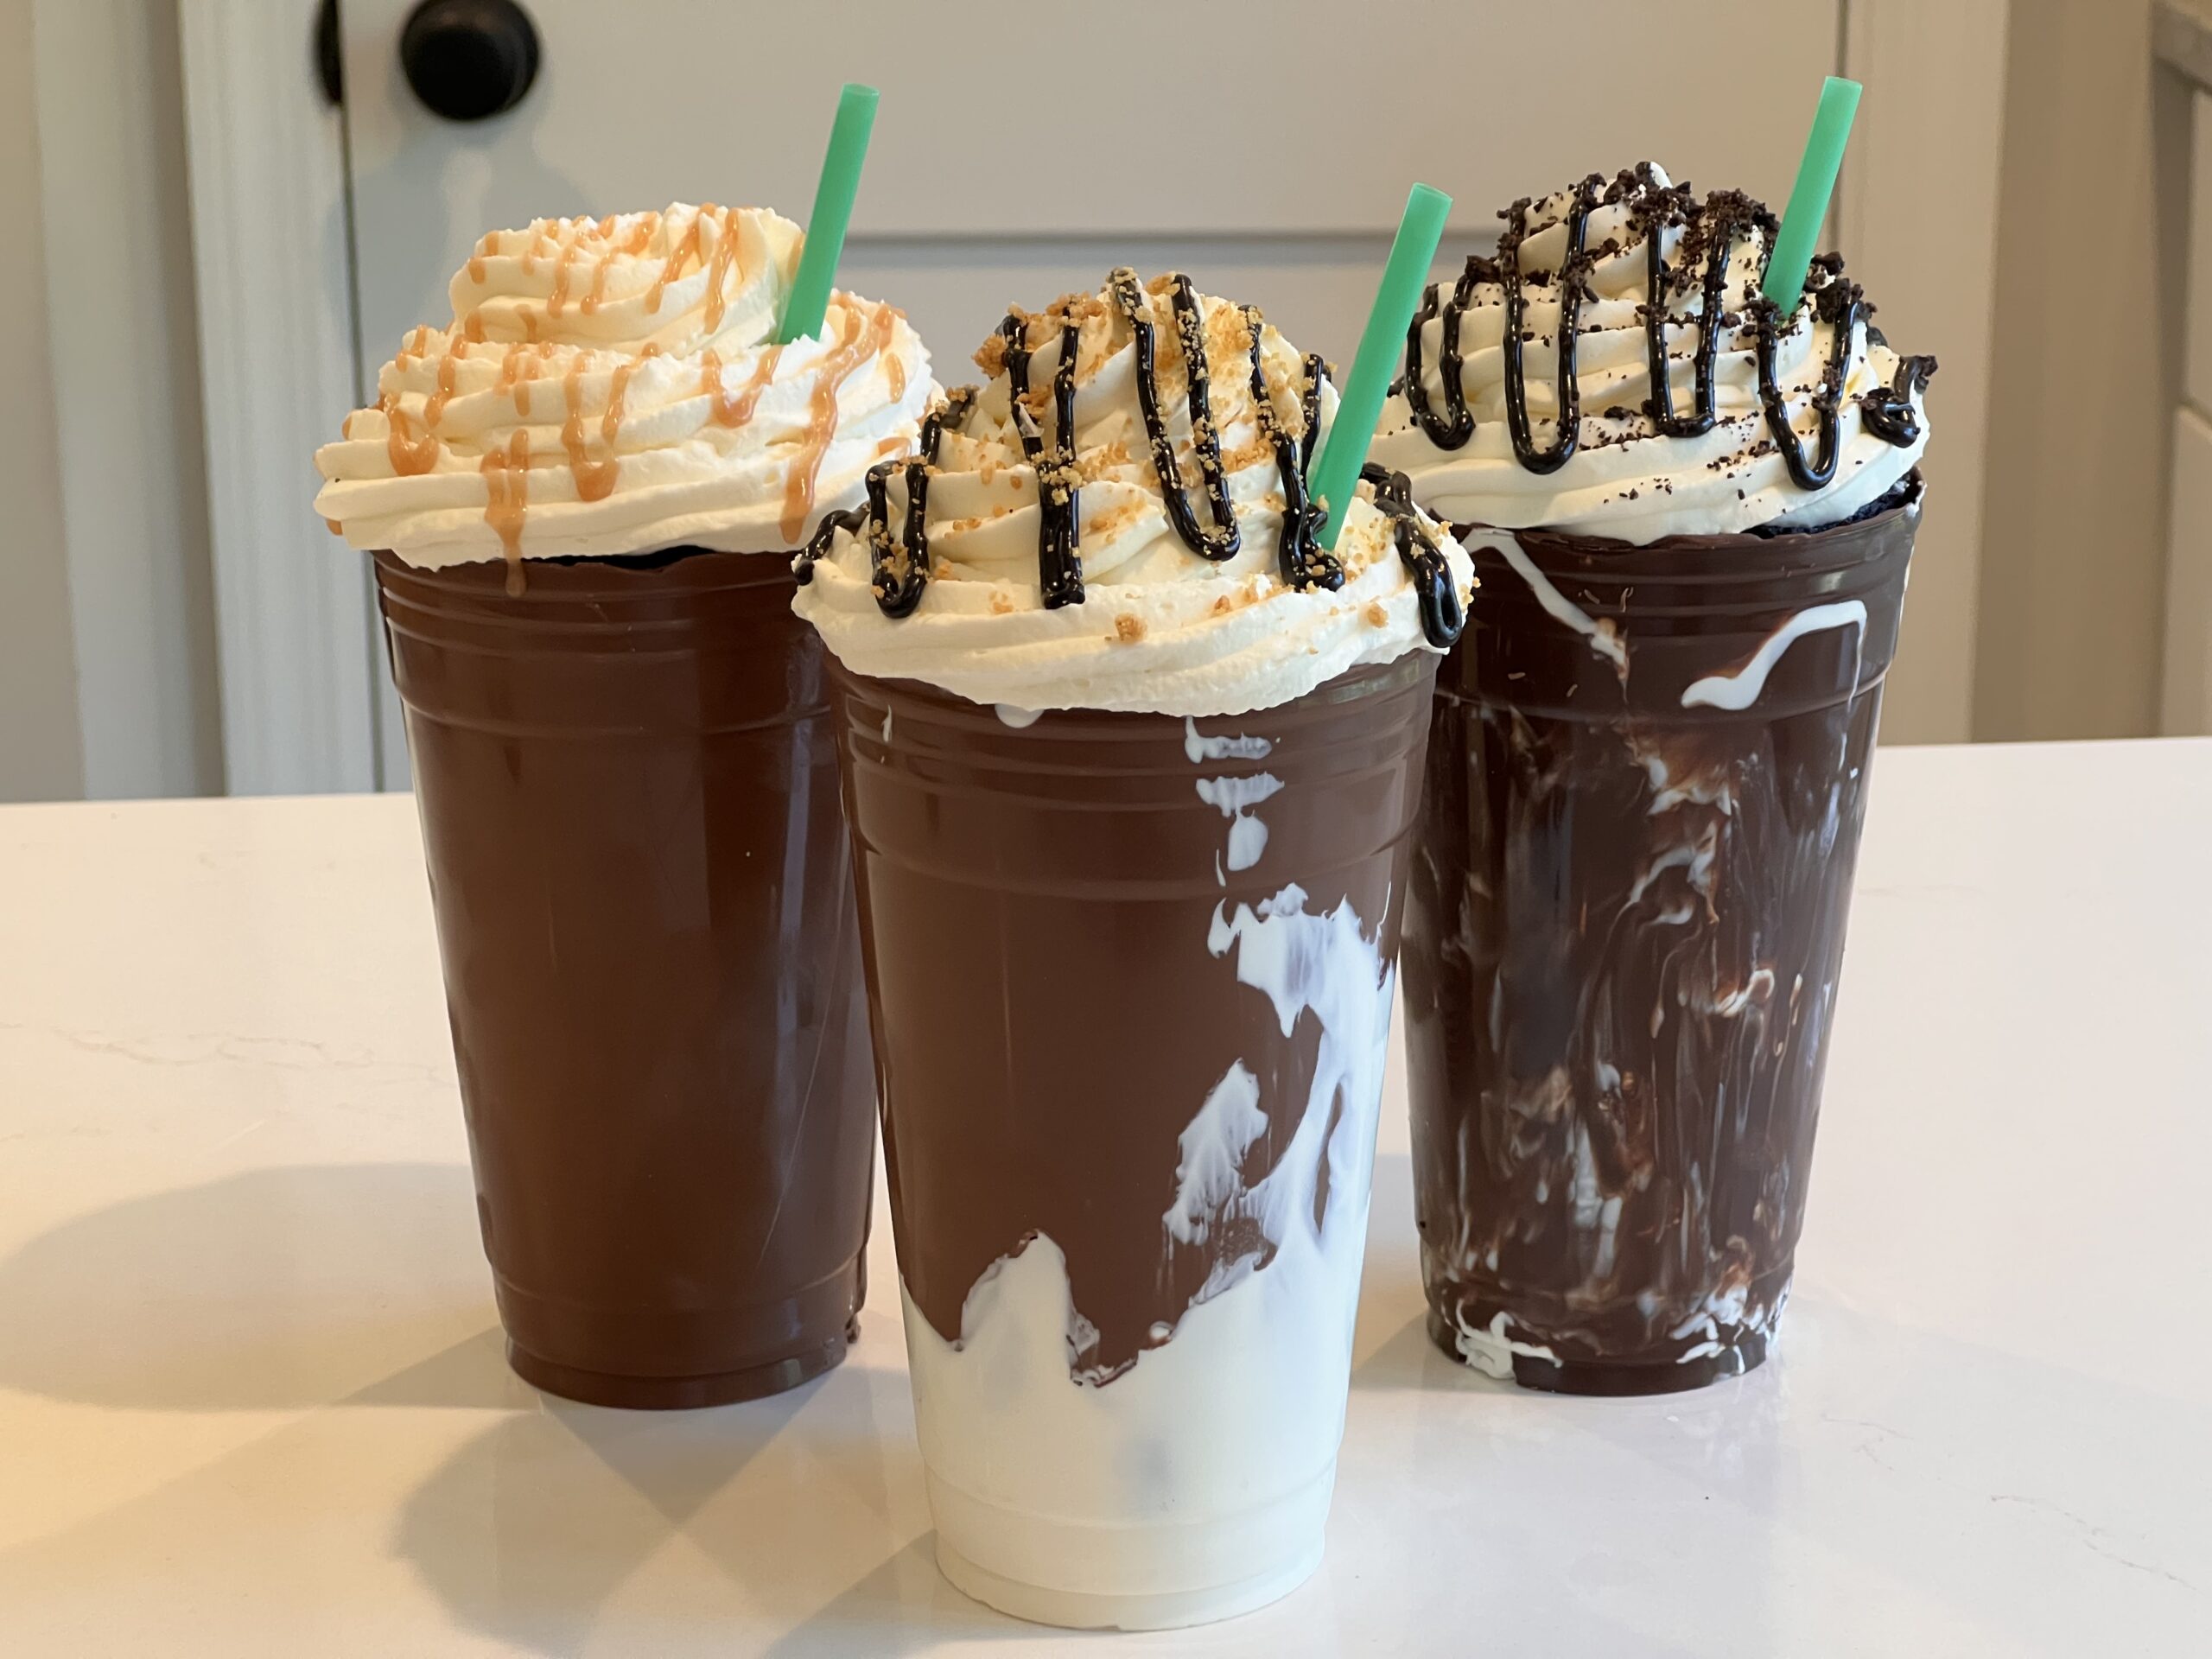 “Iced Frappe” Cakes